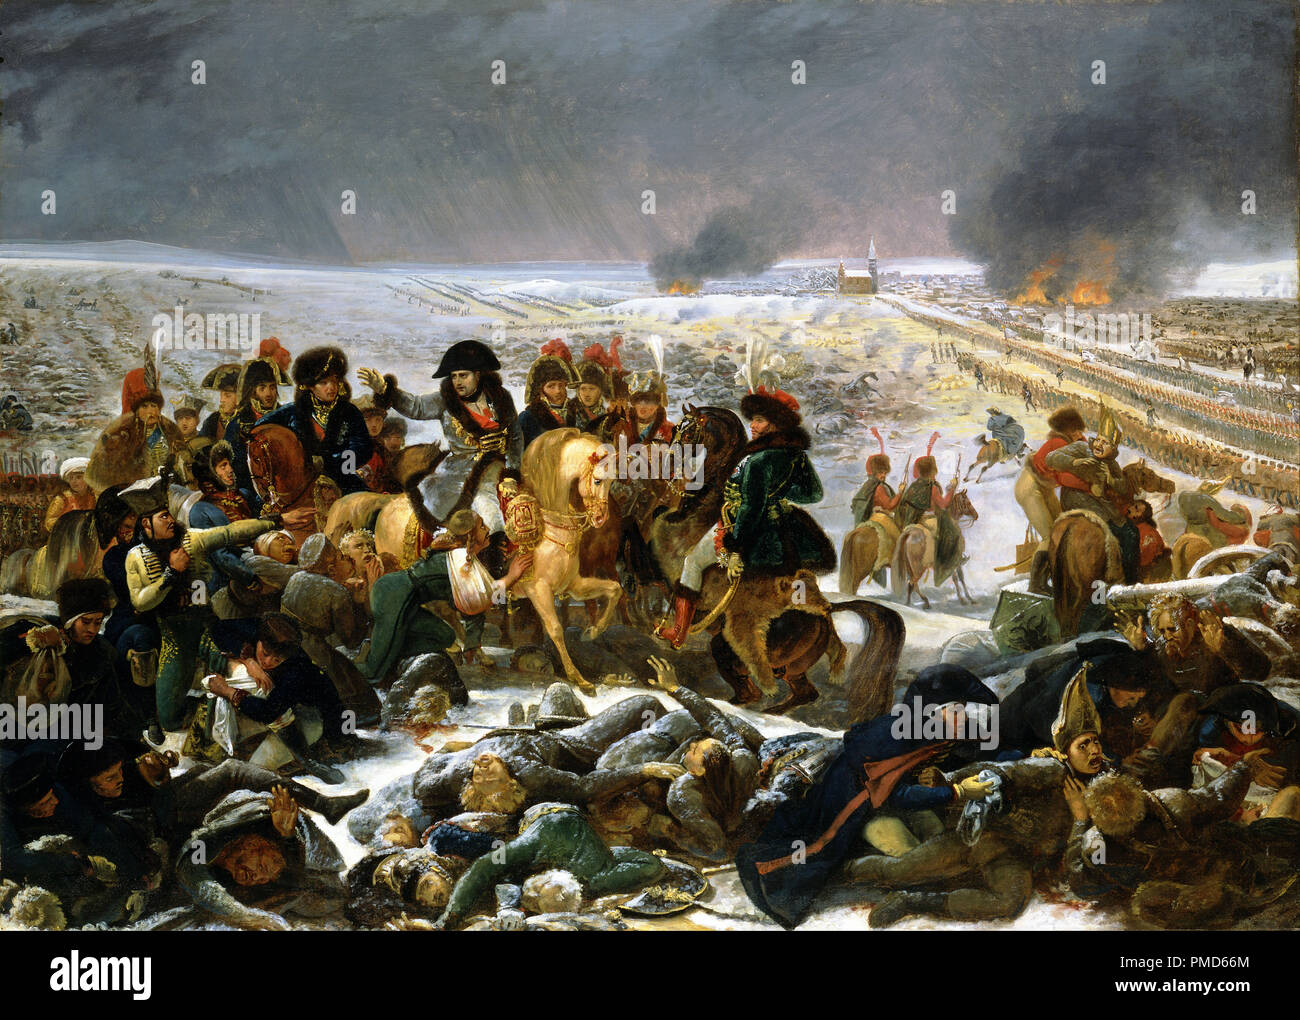 Napoleon on the Battlefield of Eylau. Date/Period: 1807. Painting. Oil on canvas. Height: 104.9 cm (41.2 in); Width: 145.1 cm (57.1 in). Author: Antoine-Jean Gros. Gros, Antoine Jean, Baron. Stock Photo